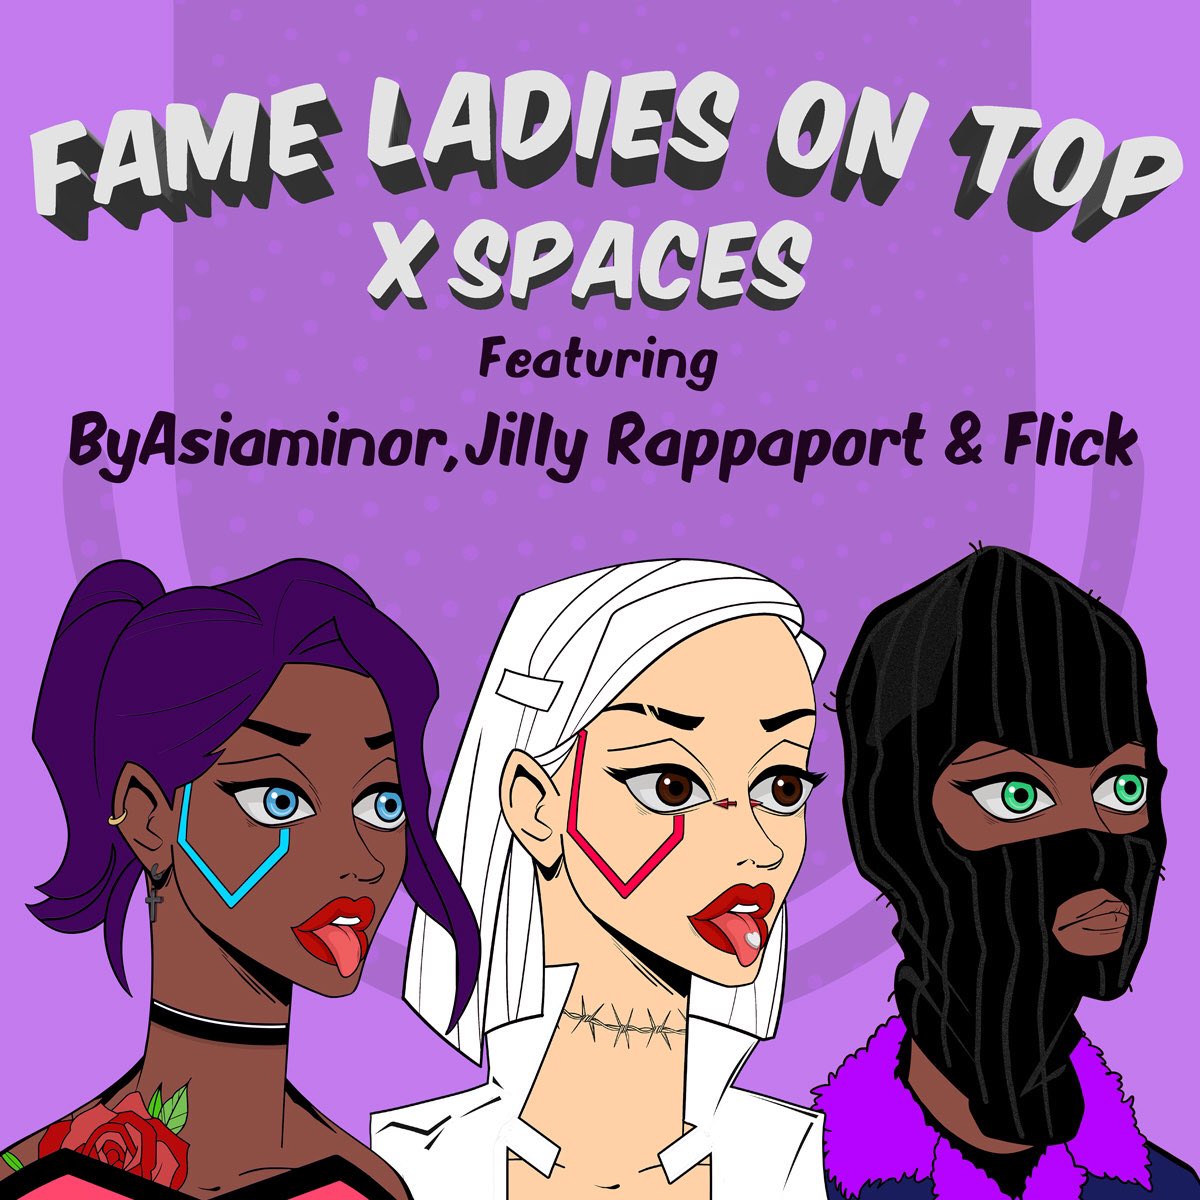 Gm Ladies💋 Please set a reminder for Episode 5 of “Fame Ladies on Top” with @byasiaminor @JillyRappaport & @0xFlick Your support is the fuel that powers the @FameLadySociety❤️‍🔥 x.com/i/spaces/1mrgm…